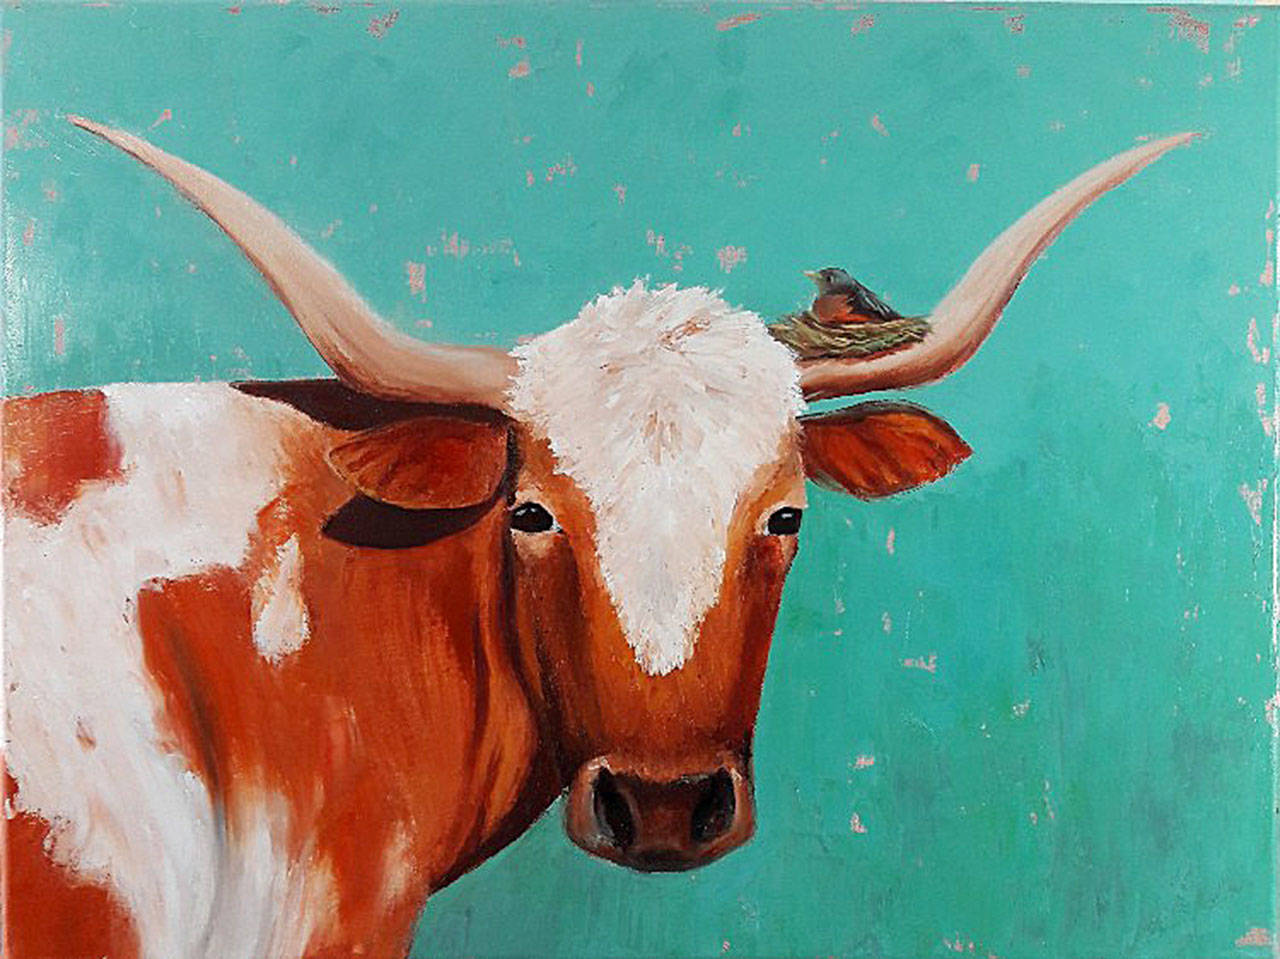 See new oil paintings by Leah Rene Welch, including “Home on the Range,” through August at Gallery North in Edmonds.